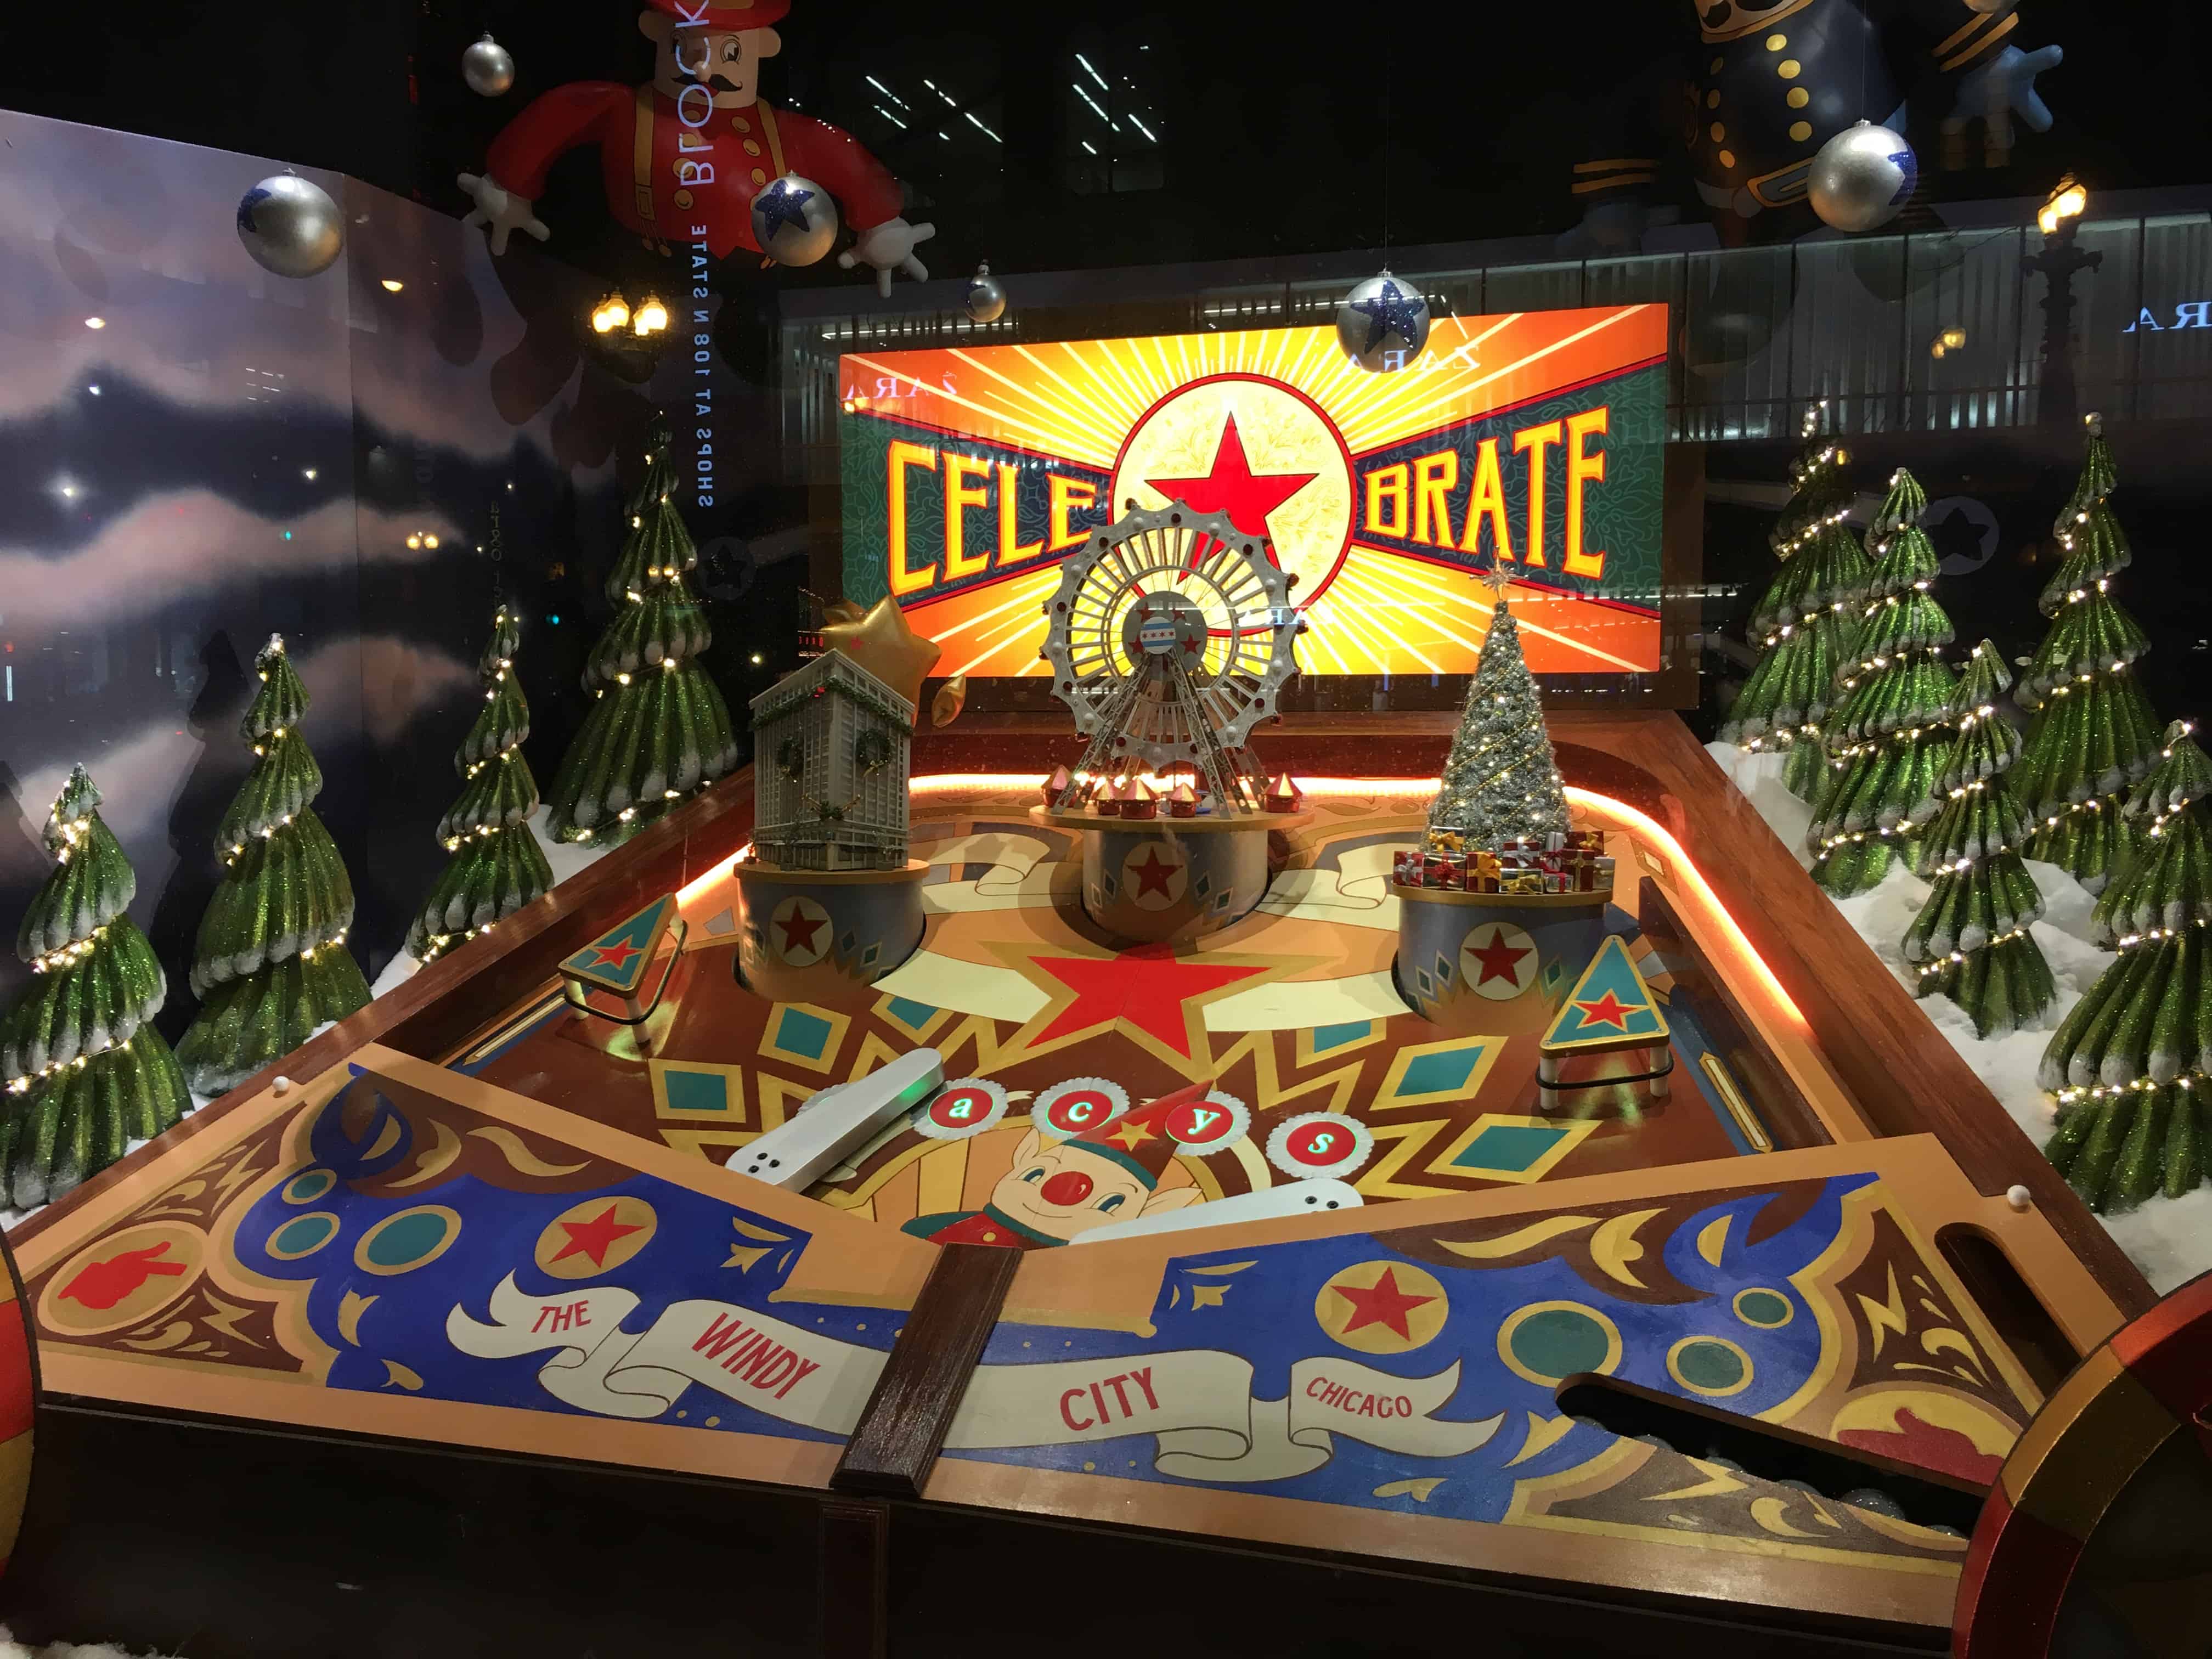 Pinball-themed holiday window display at Macy's in Chicago, Illinois